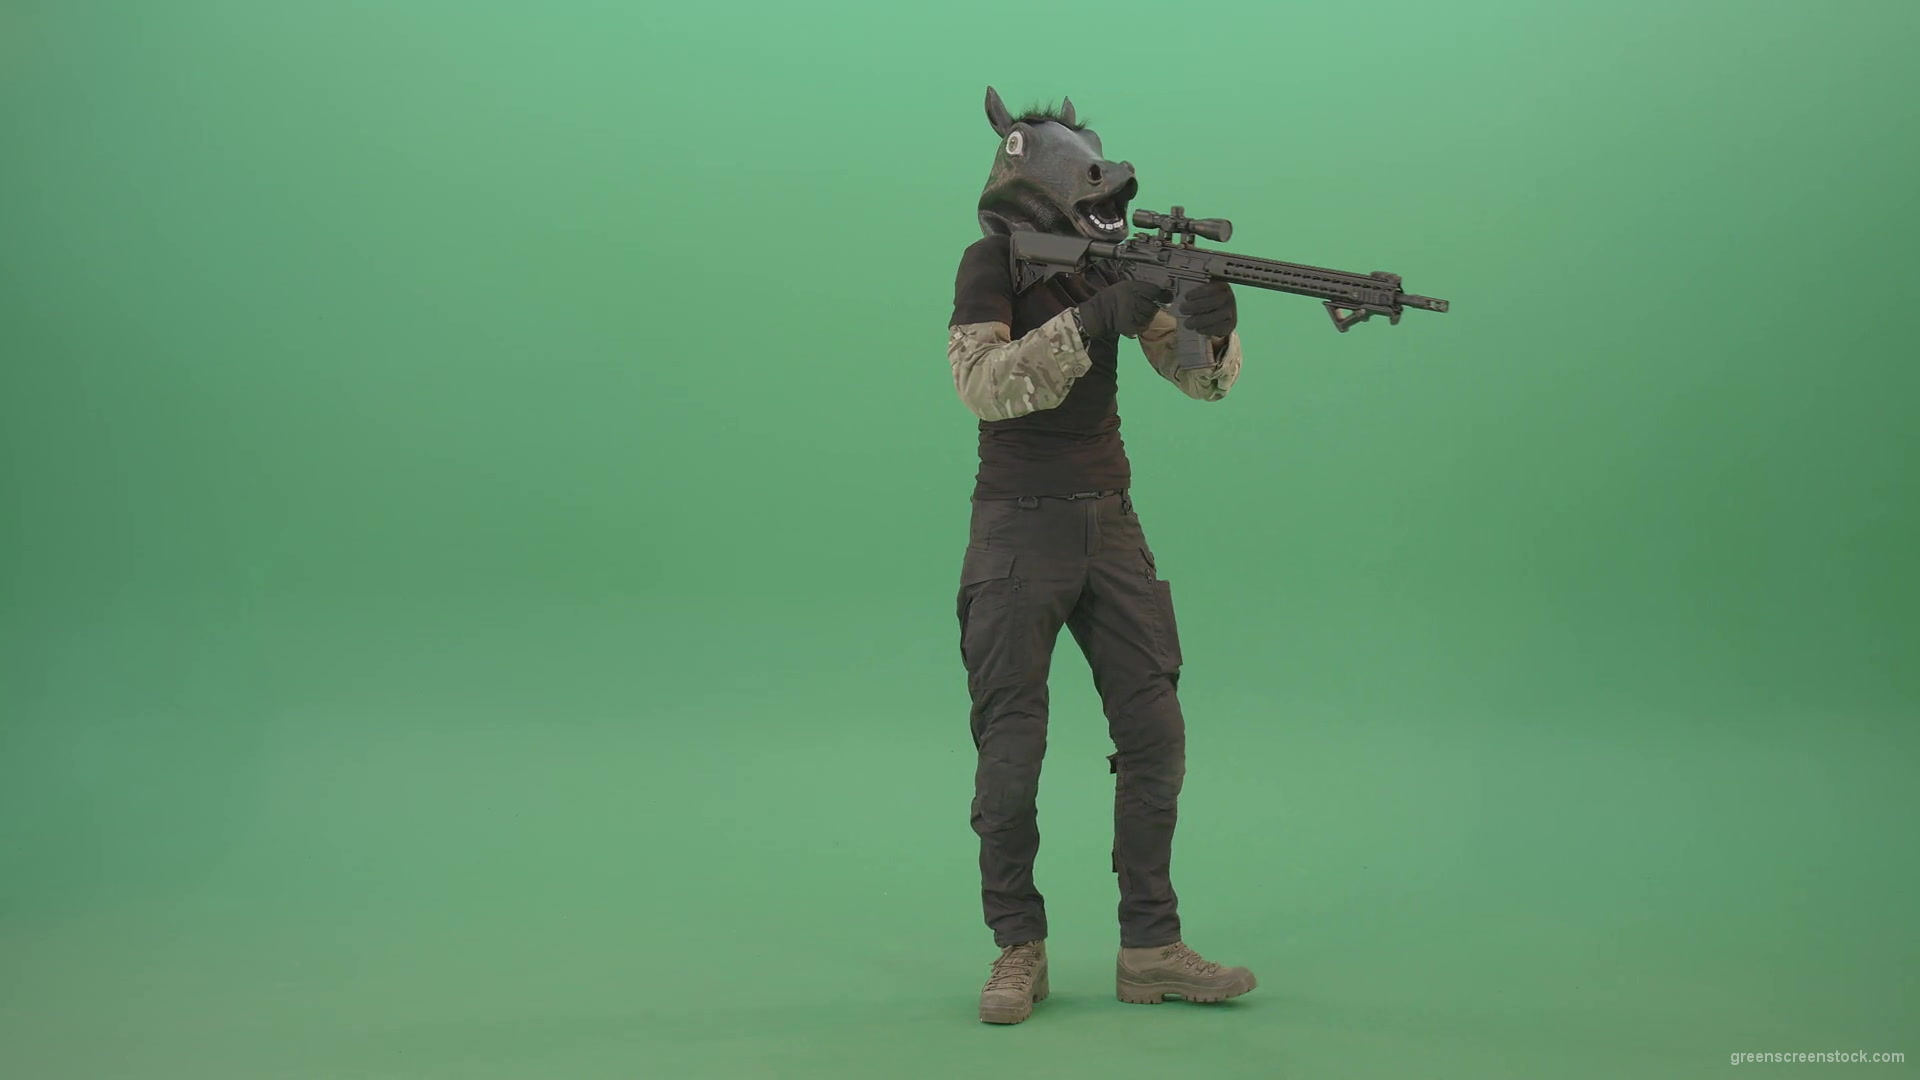 Funny-Army-Horse-Man-shooting-animals-on-Green-Screen-from-Machine-Gun-4K-Video-Footage-1920_007 Green Screen Stock